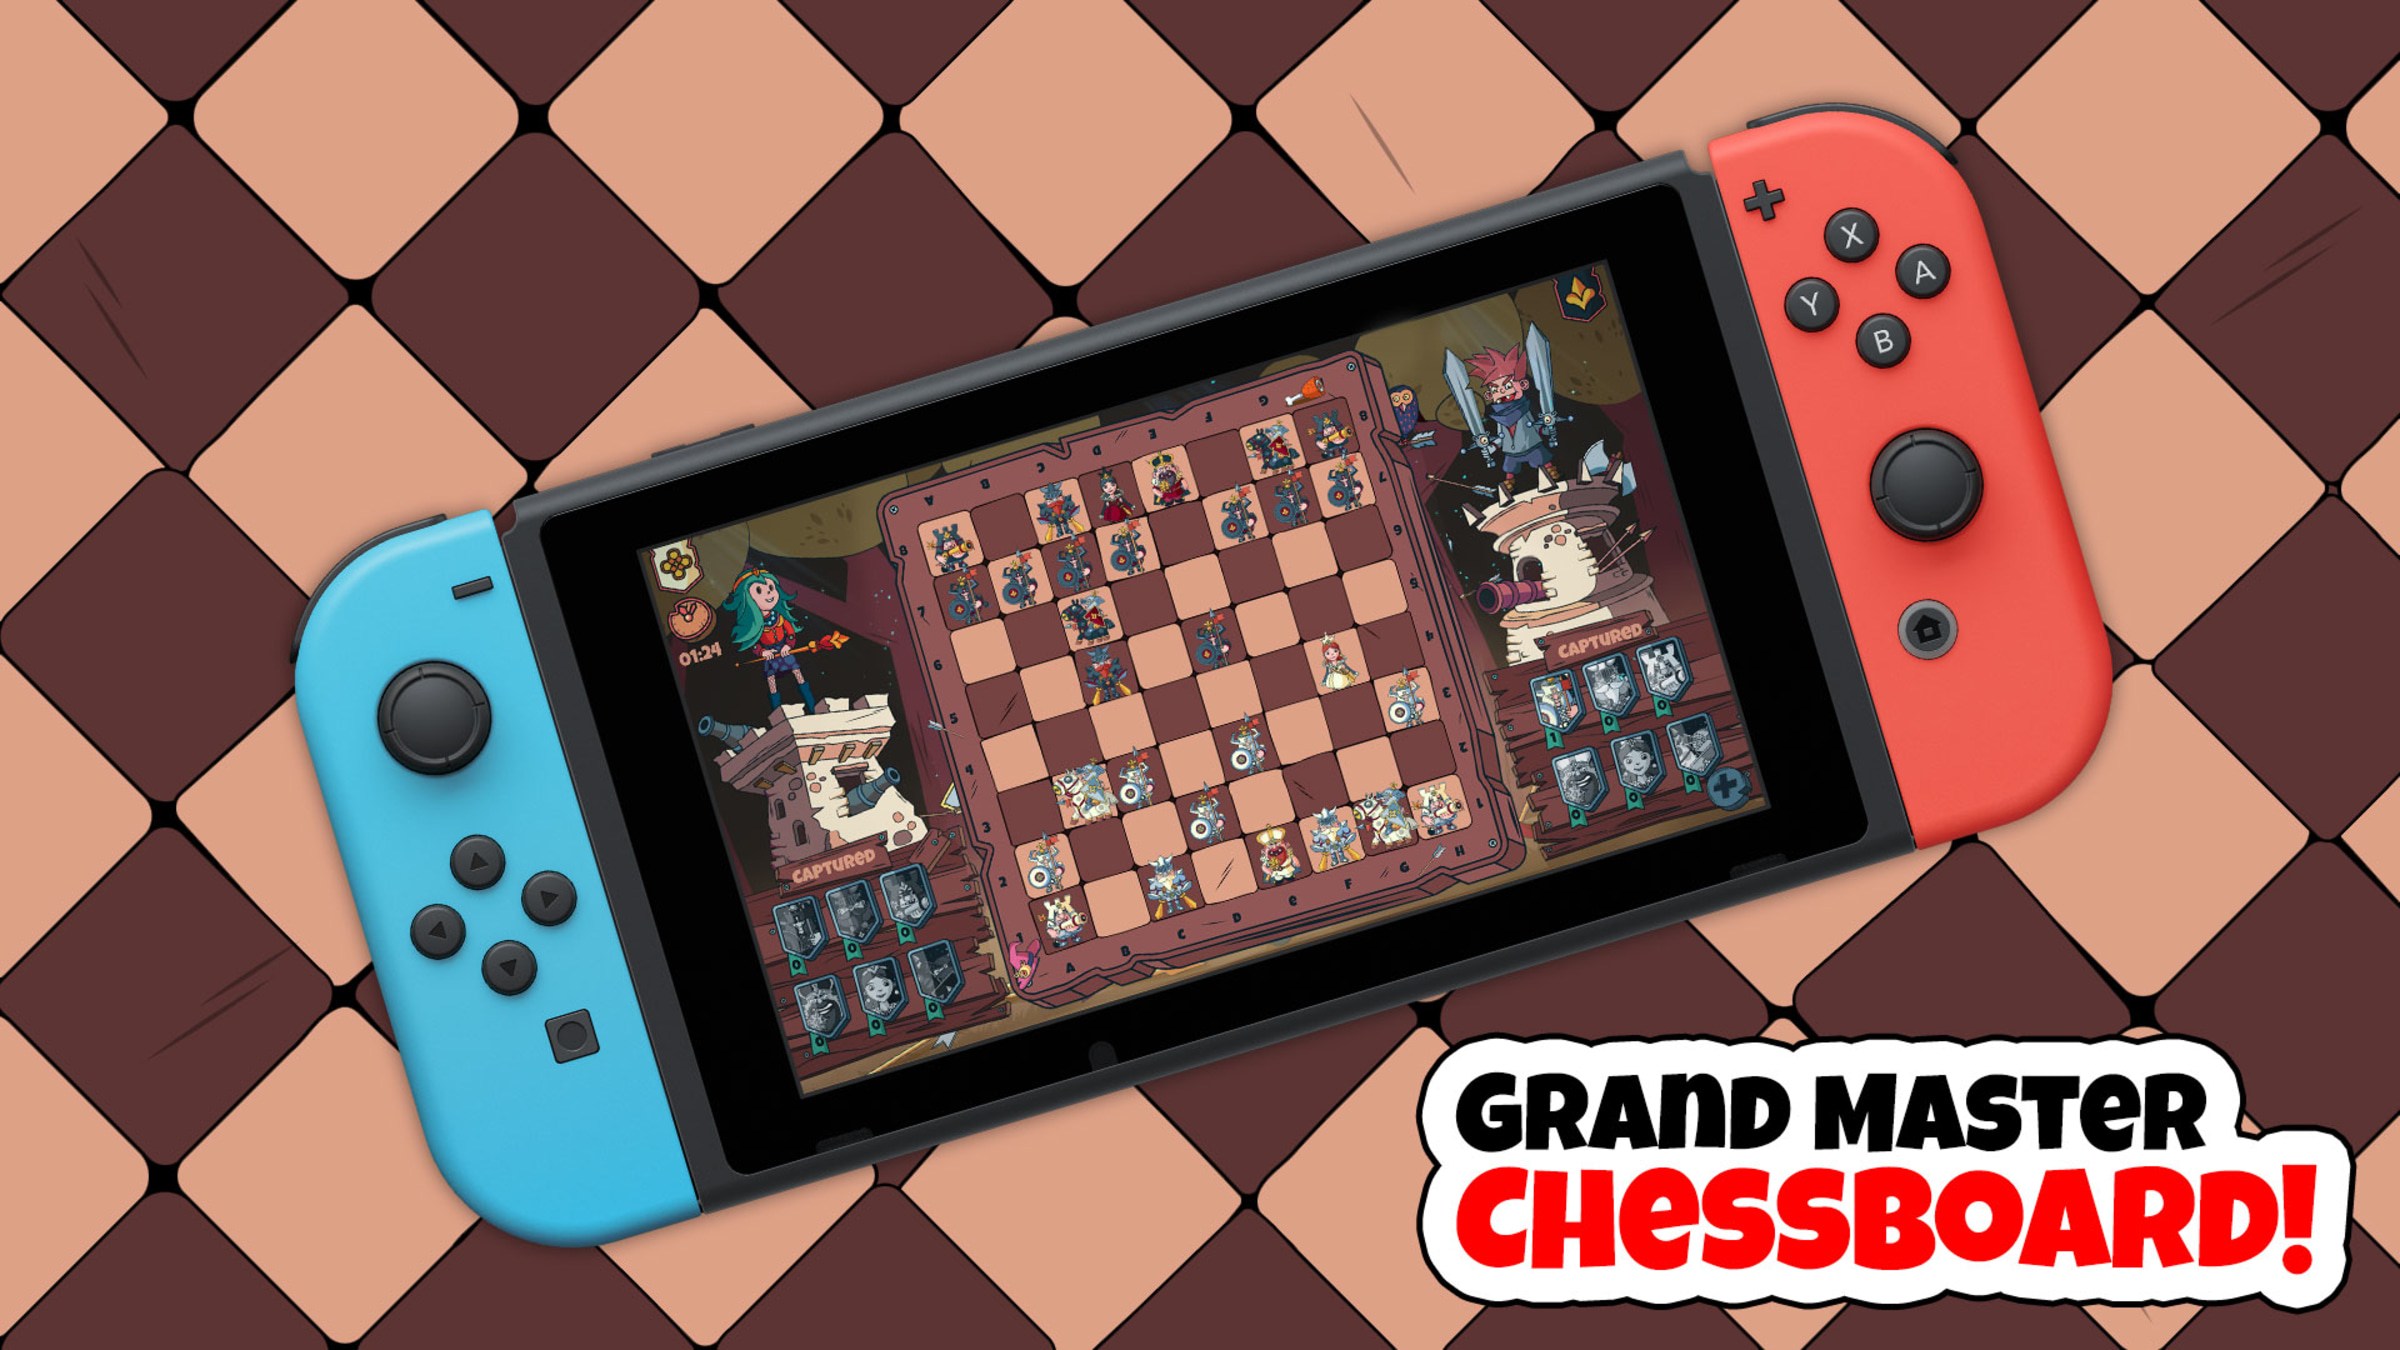 Chess Classic Board Game for Nintendo Switch - Nintendo Official Site